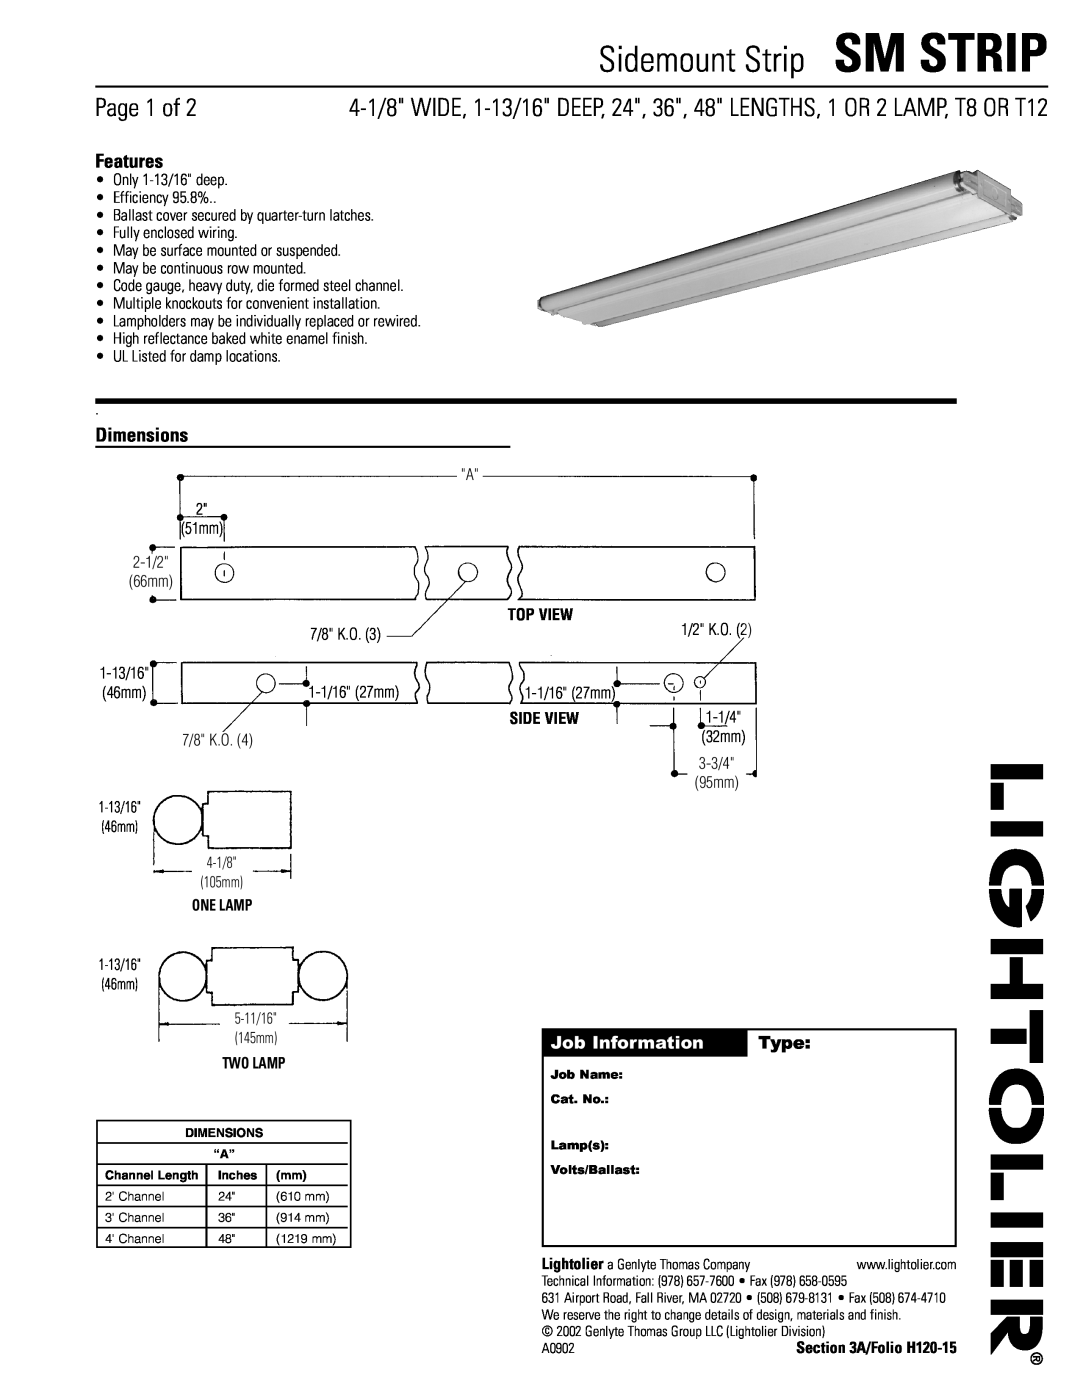 Lightolier dimensions Features, Dimensions, Job Information, Type, Sidemount Strip SM STRIP, Page 1 of, Two Lamp 